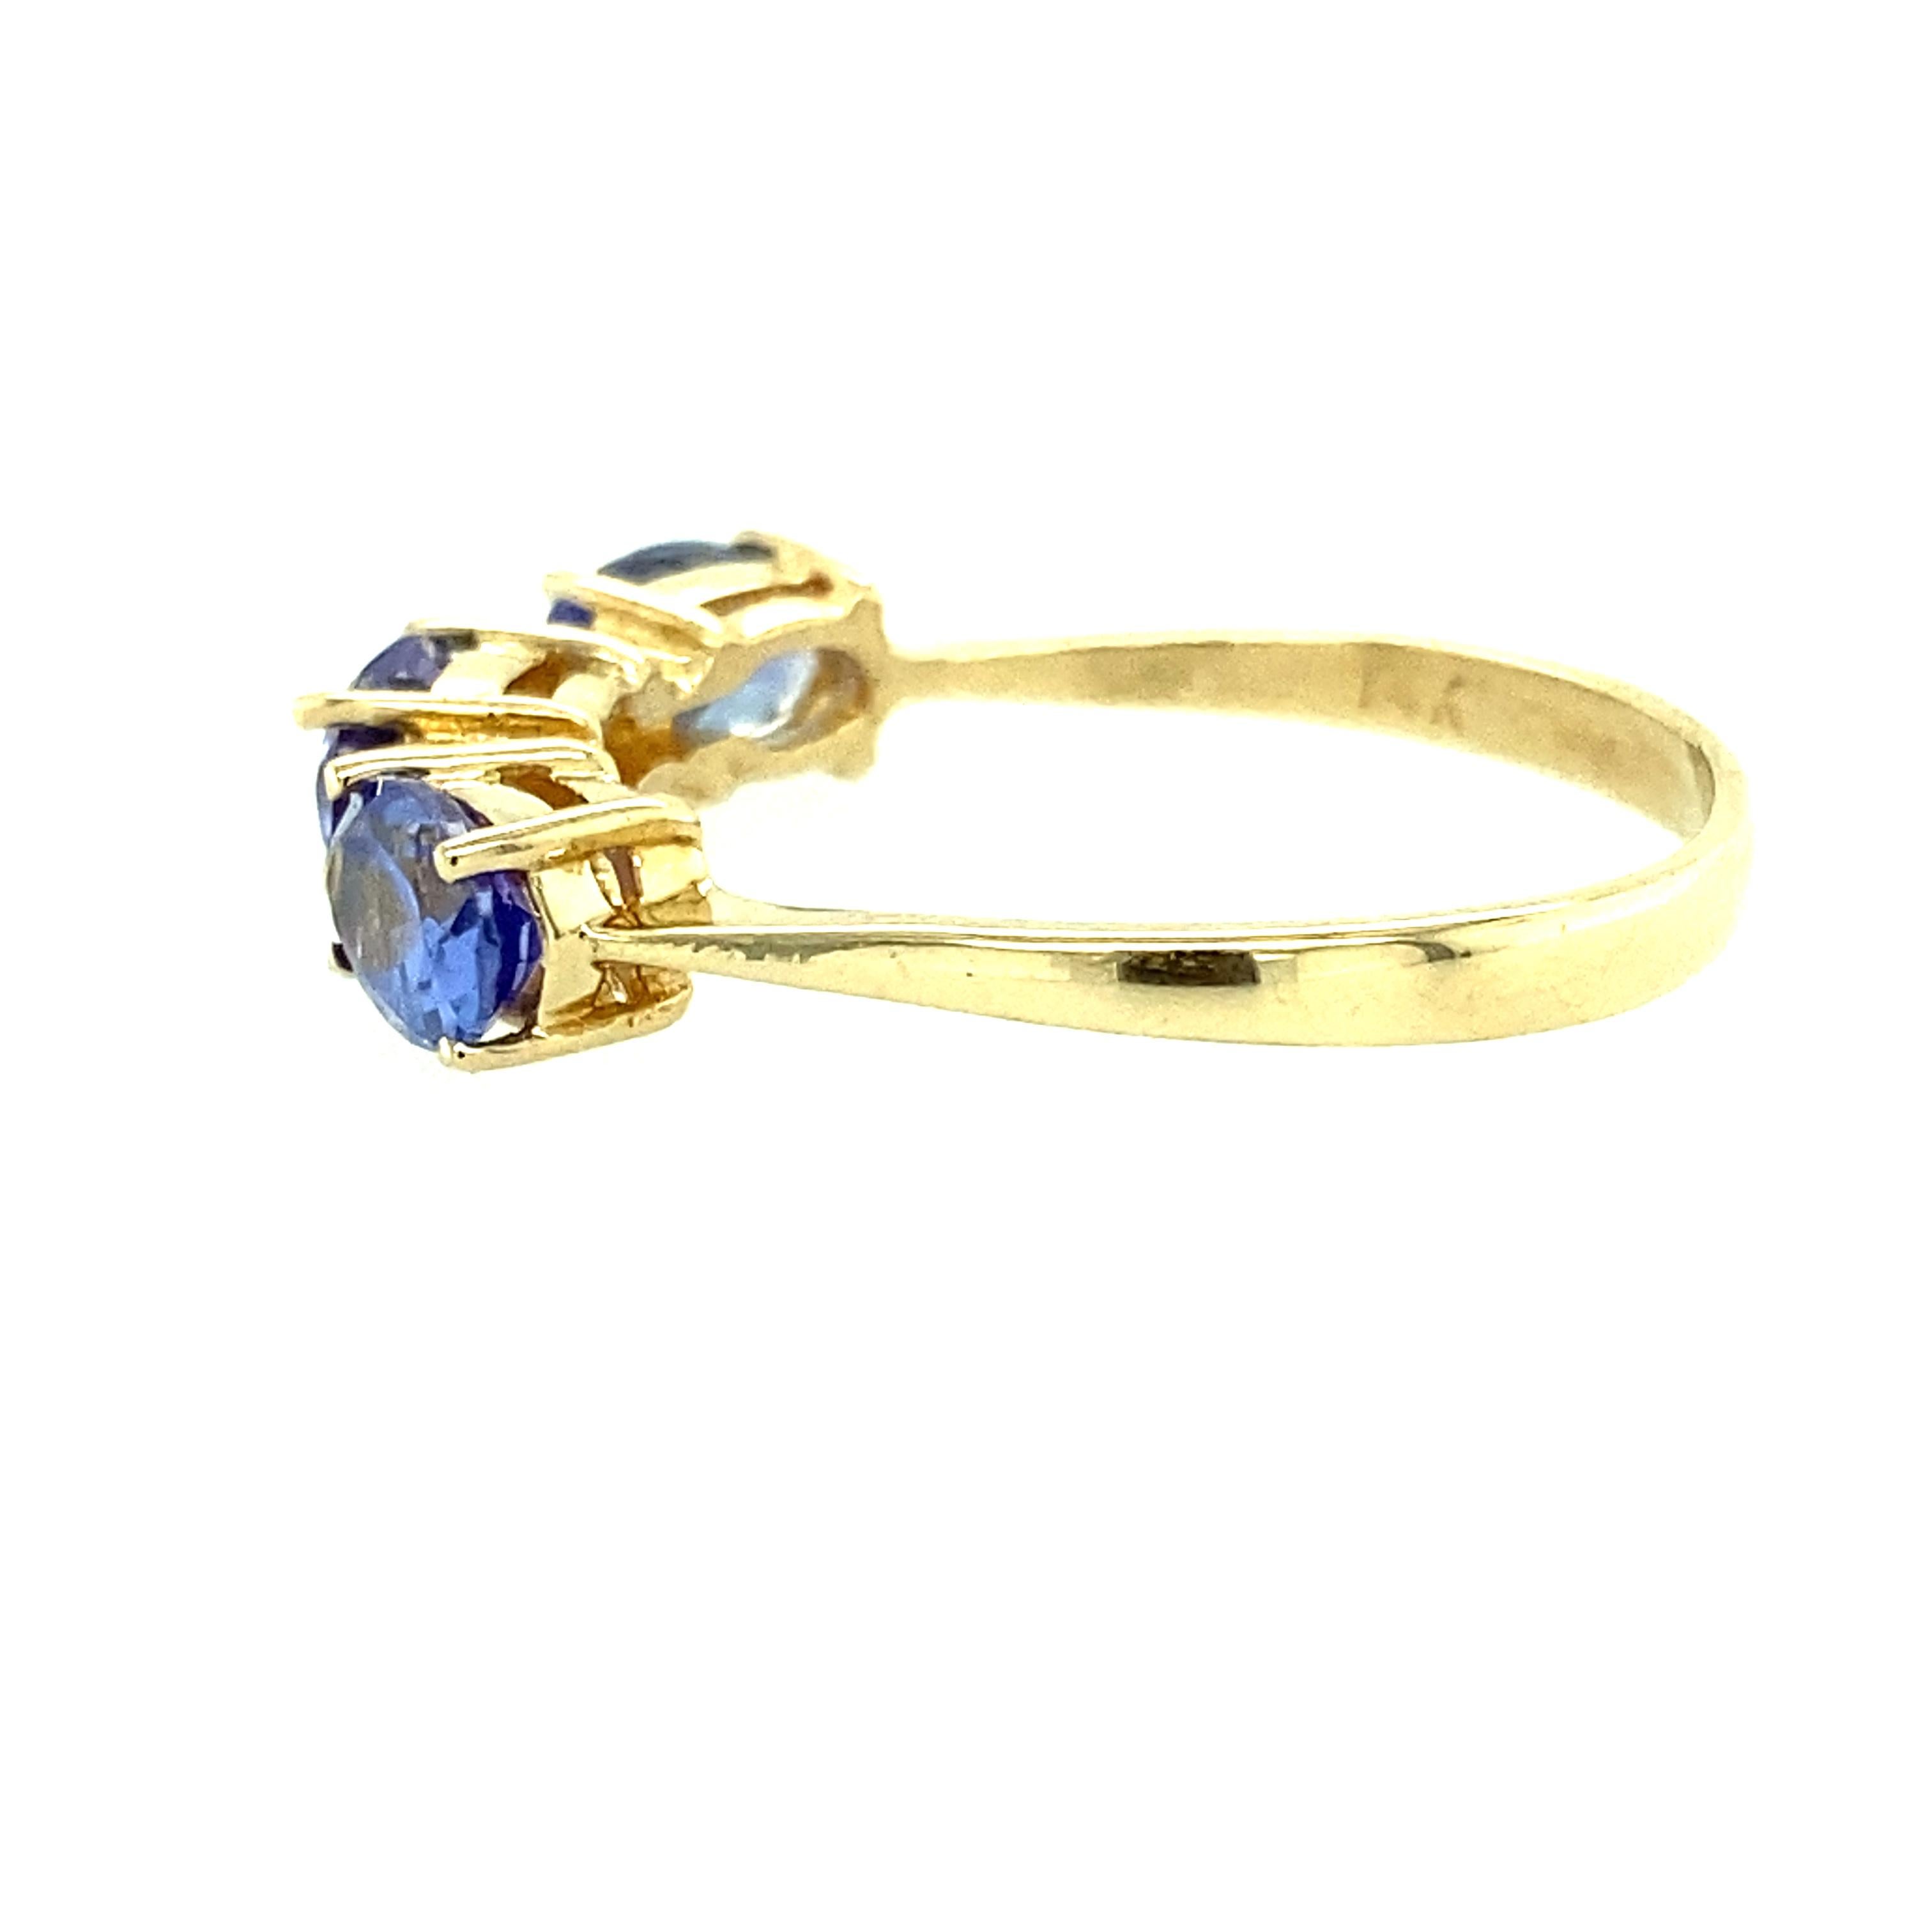 One 14 karat yellow gold ring set with three 6x4 natural tanzanite stones and two brilliant cut diamonds, approximately 0.04 carat total weight with matching I-J color and I1 clarity.  The ring is a finger size 7.25.  